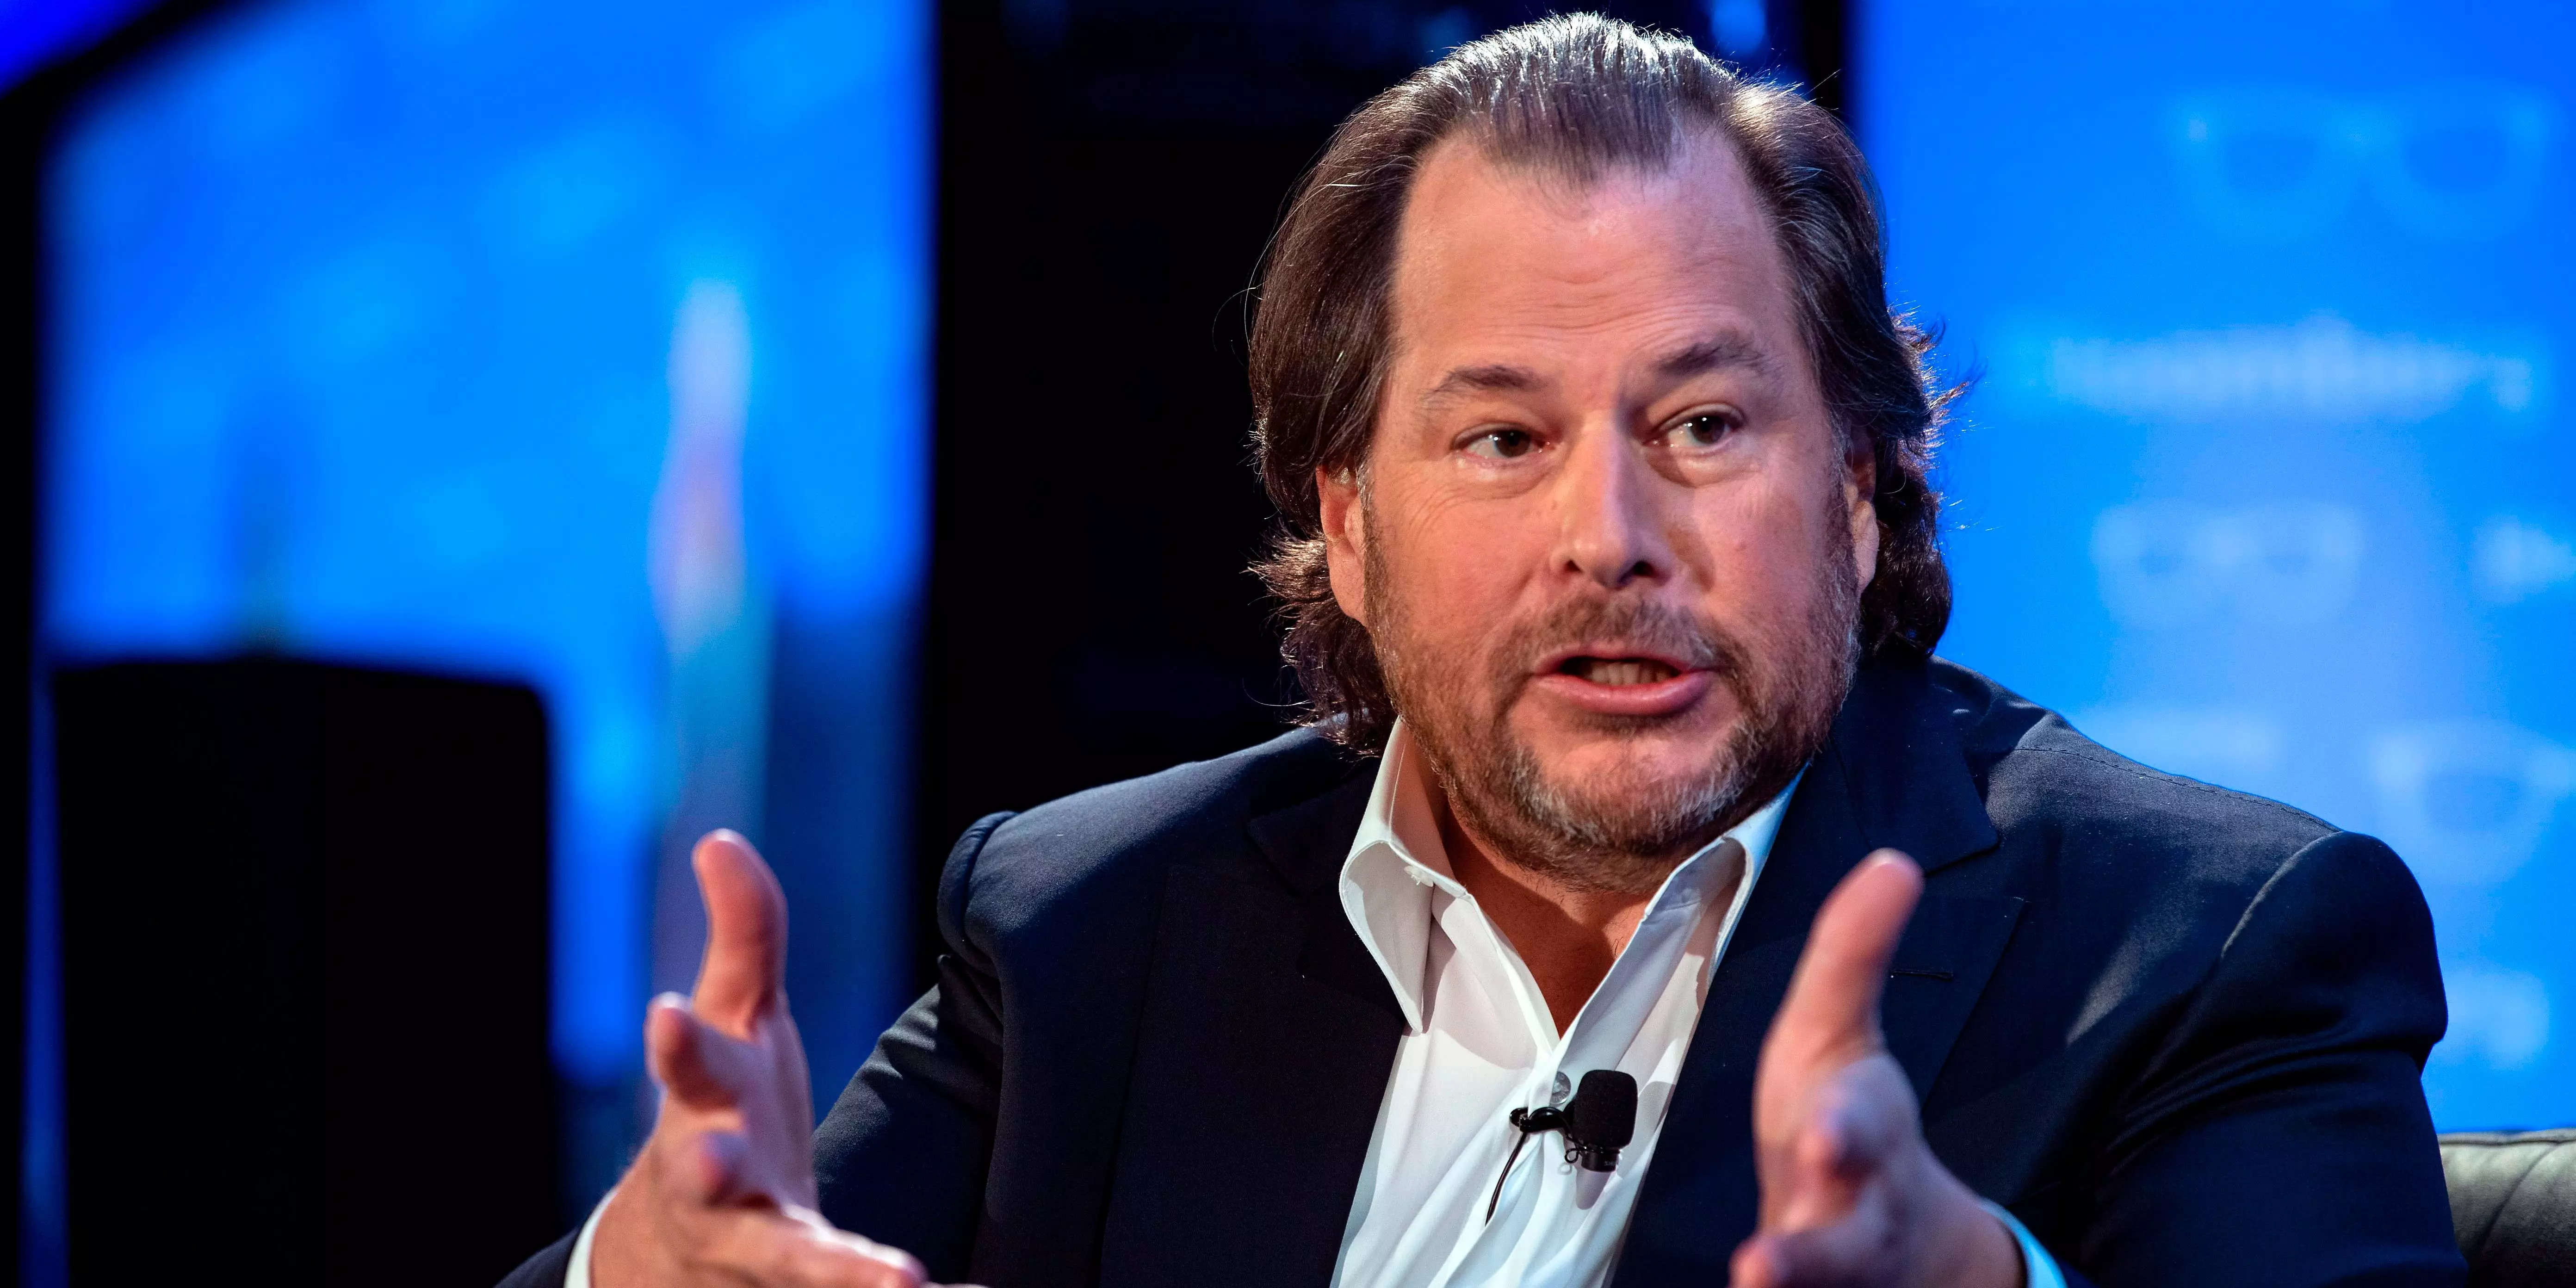 
Salesforce could spark a broader rally in the tech sector after better-than-feared earnings results, Wedbush says
